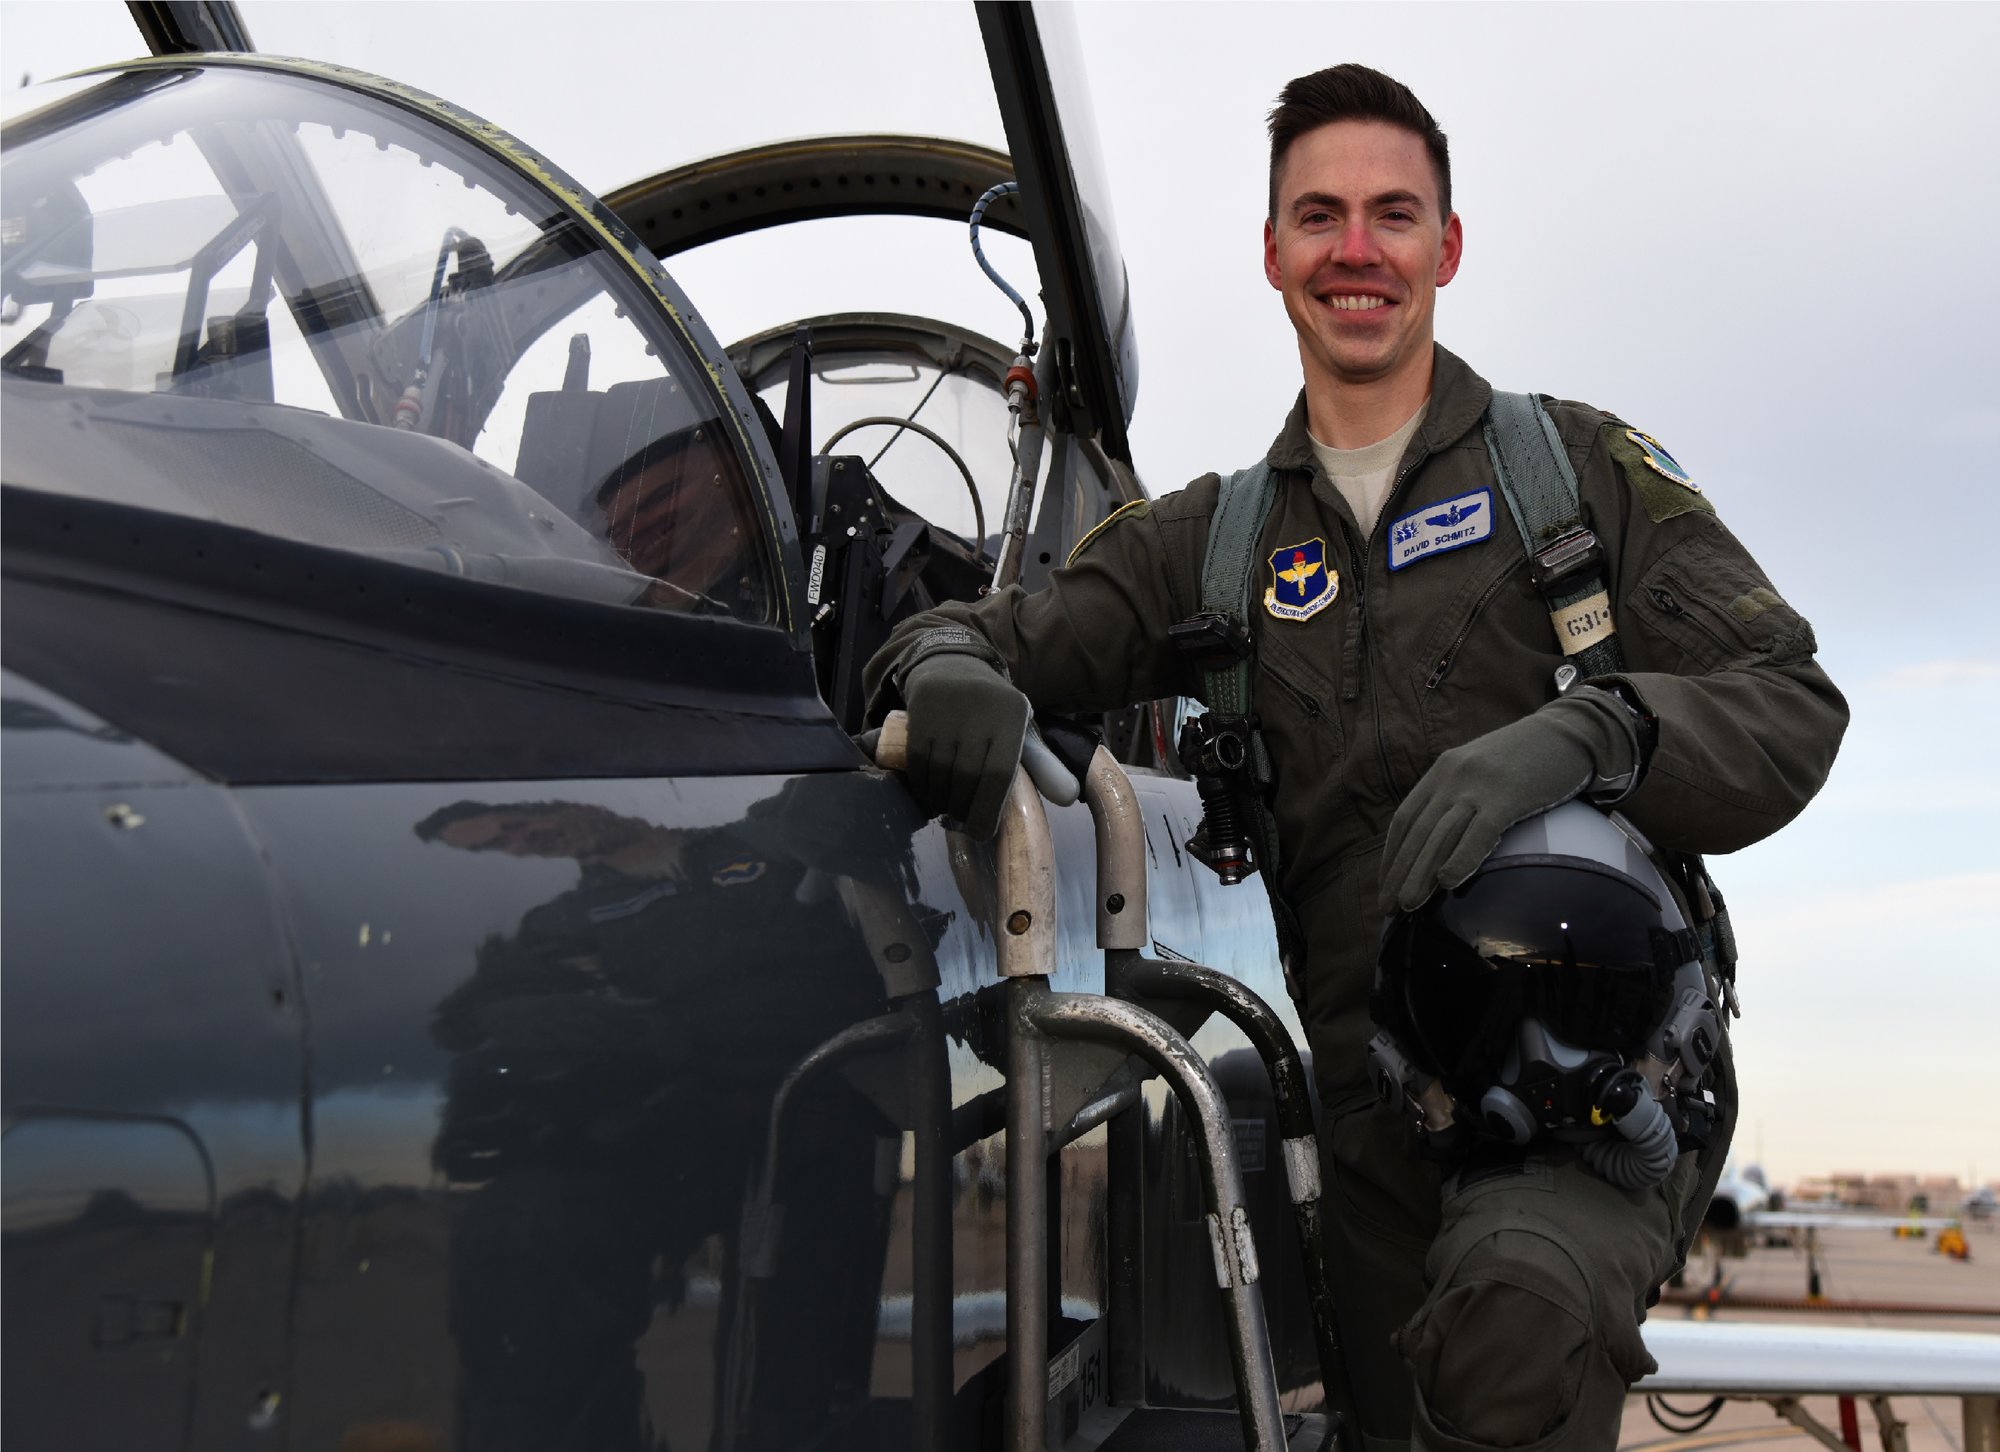 PHOTOS PROVIDEDFirst Lt. David John Schmitz, 32, died Tuesday, June 30, in an F-16 training accident on Shaw Air Force Base.